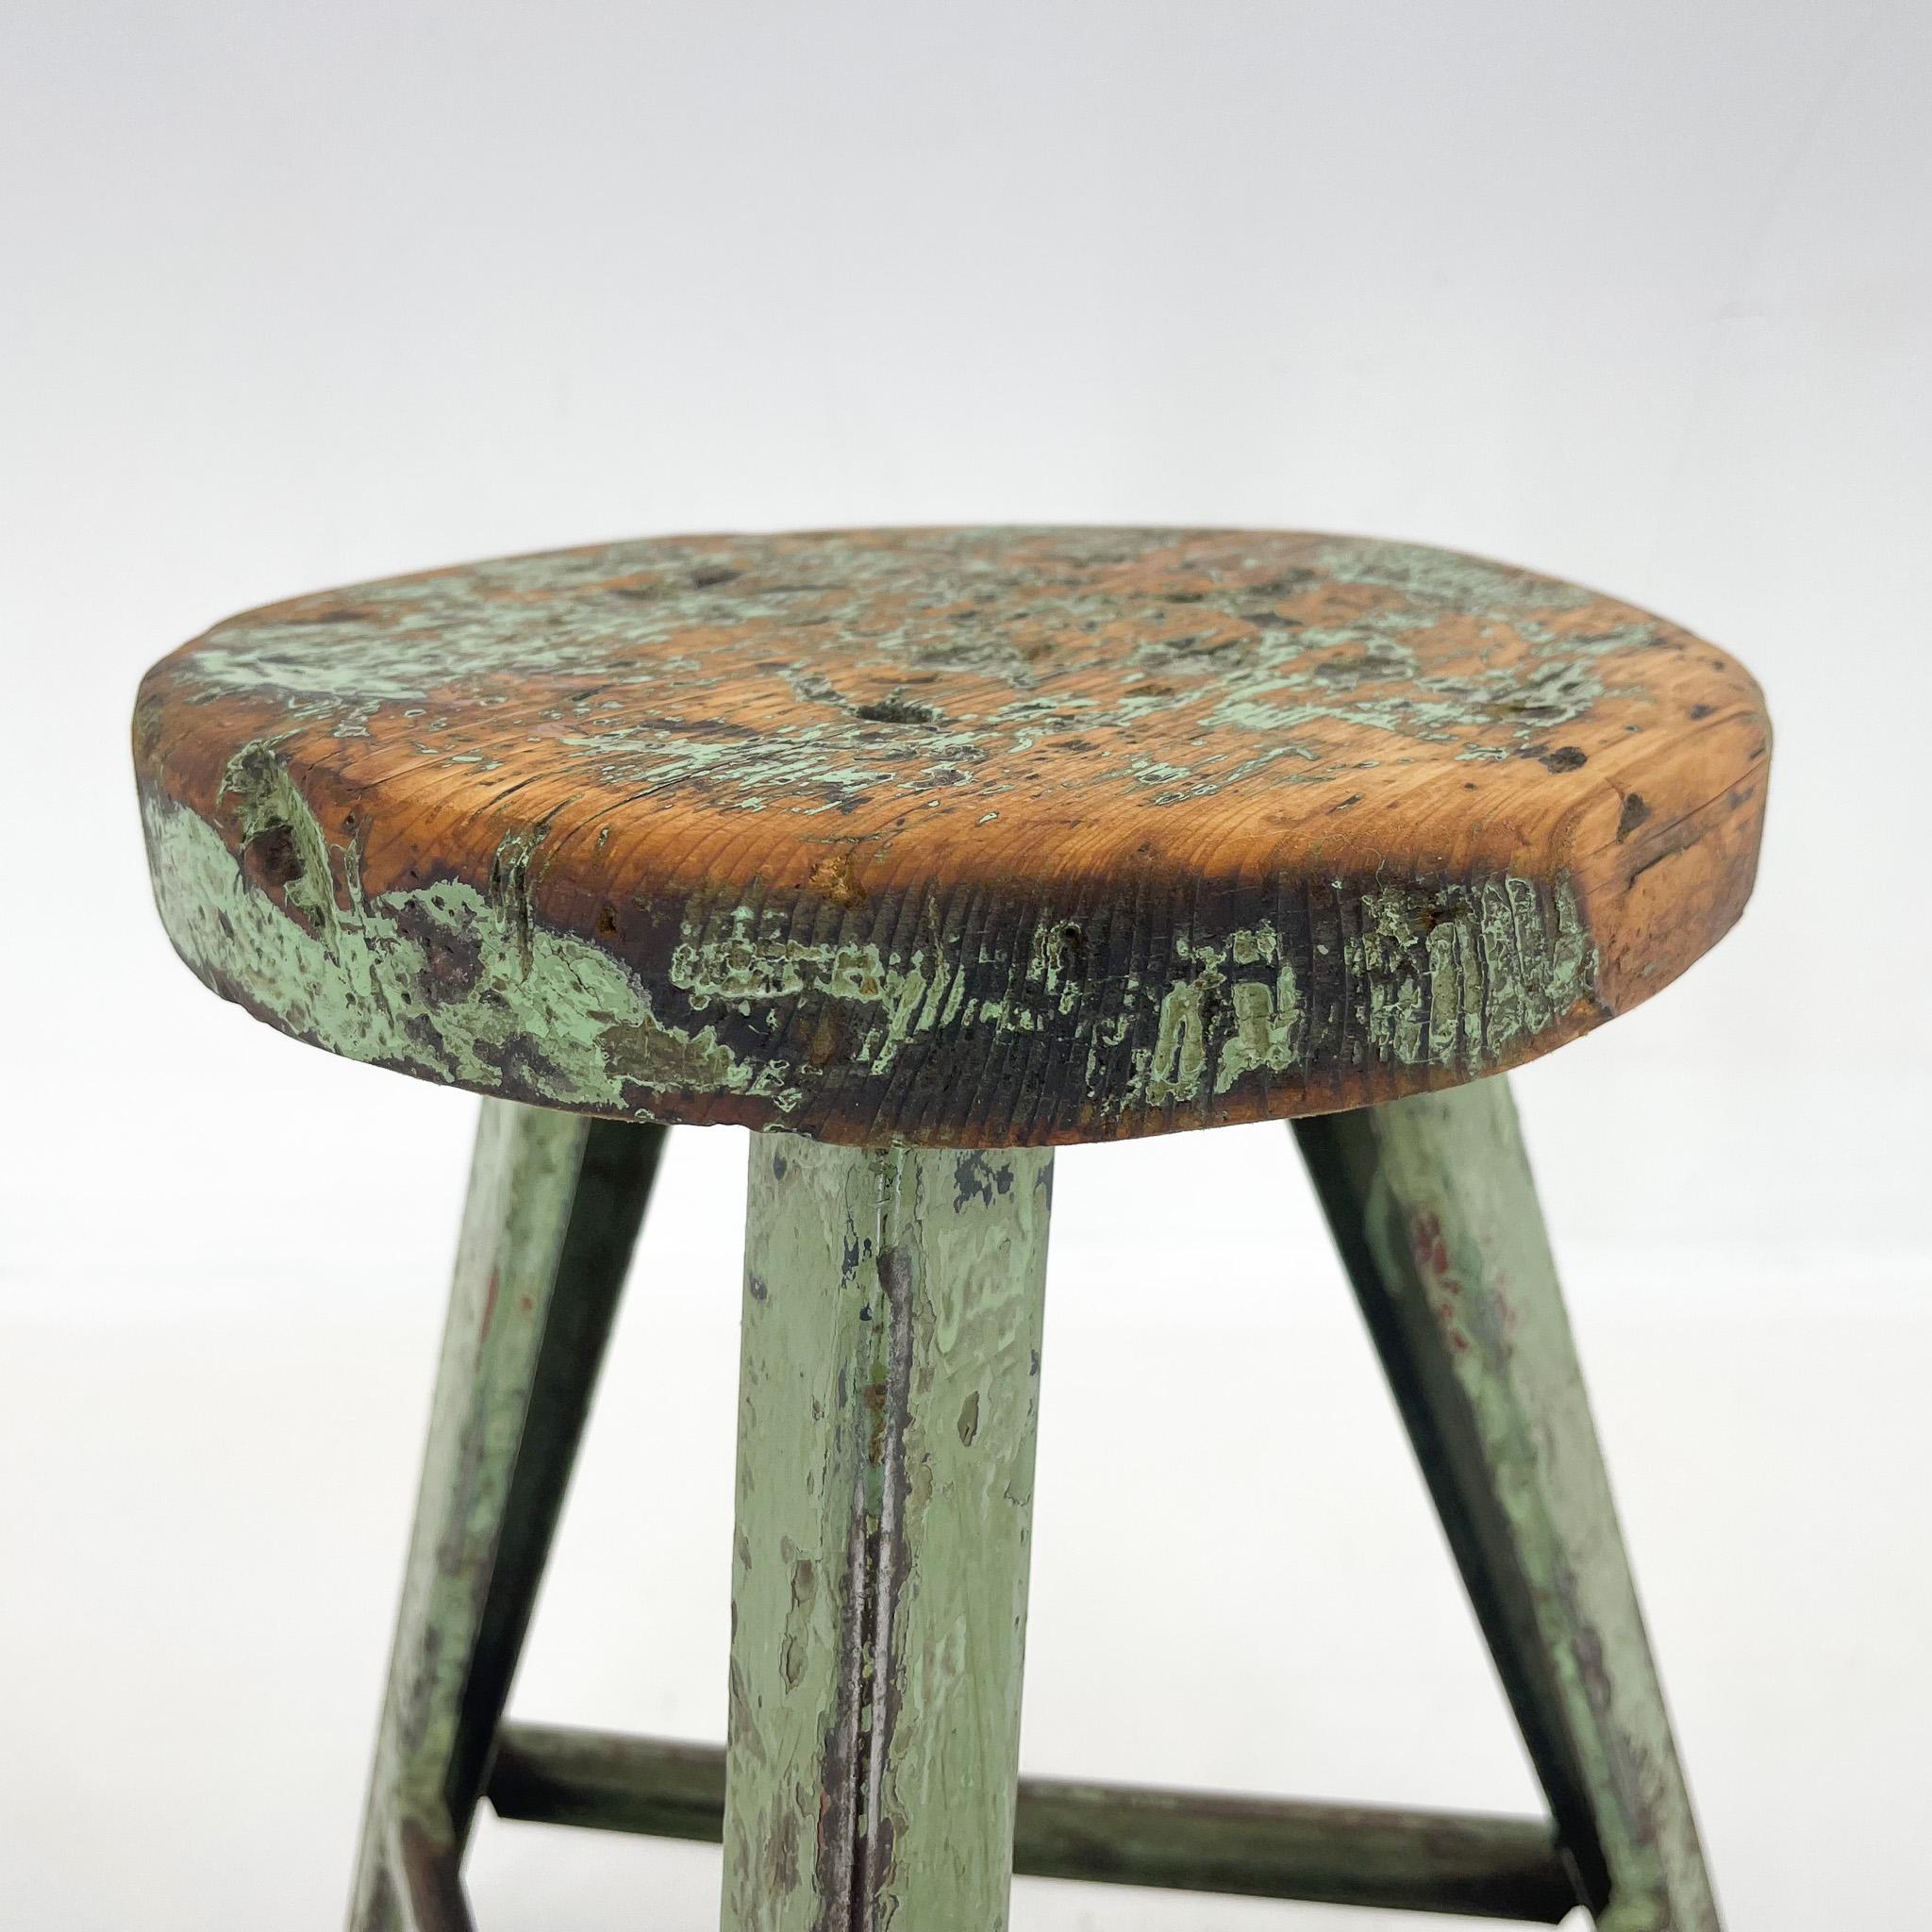 Vintage industrial tripod stool, made of steel and wood. Saved from a factory in former Czechoslovakia. The wooden seat was treated with a special oil. The diameter of the seat is 28 cm. The widest point at the bottom of the legs is 48 cm.